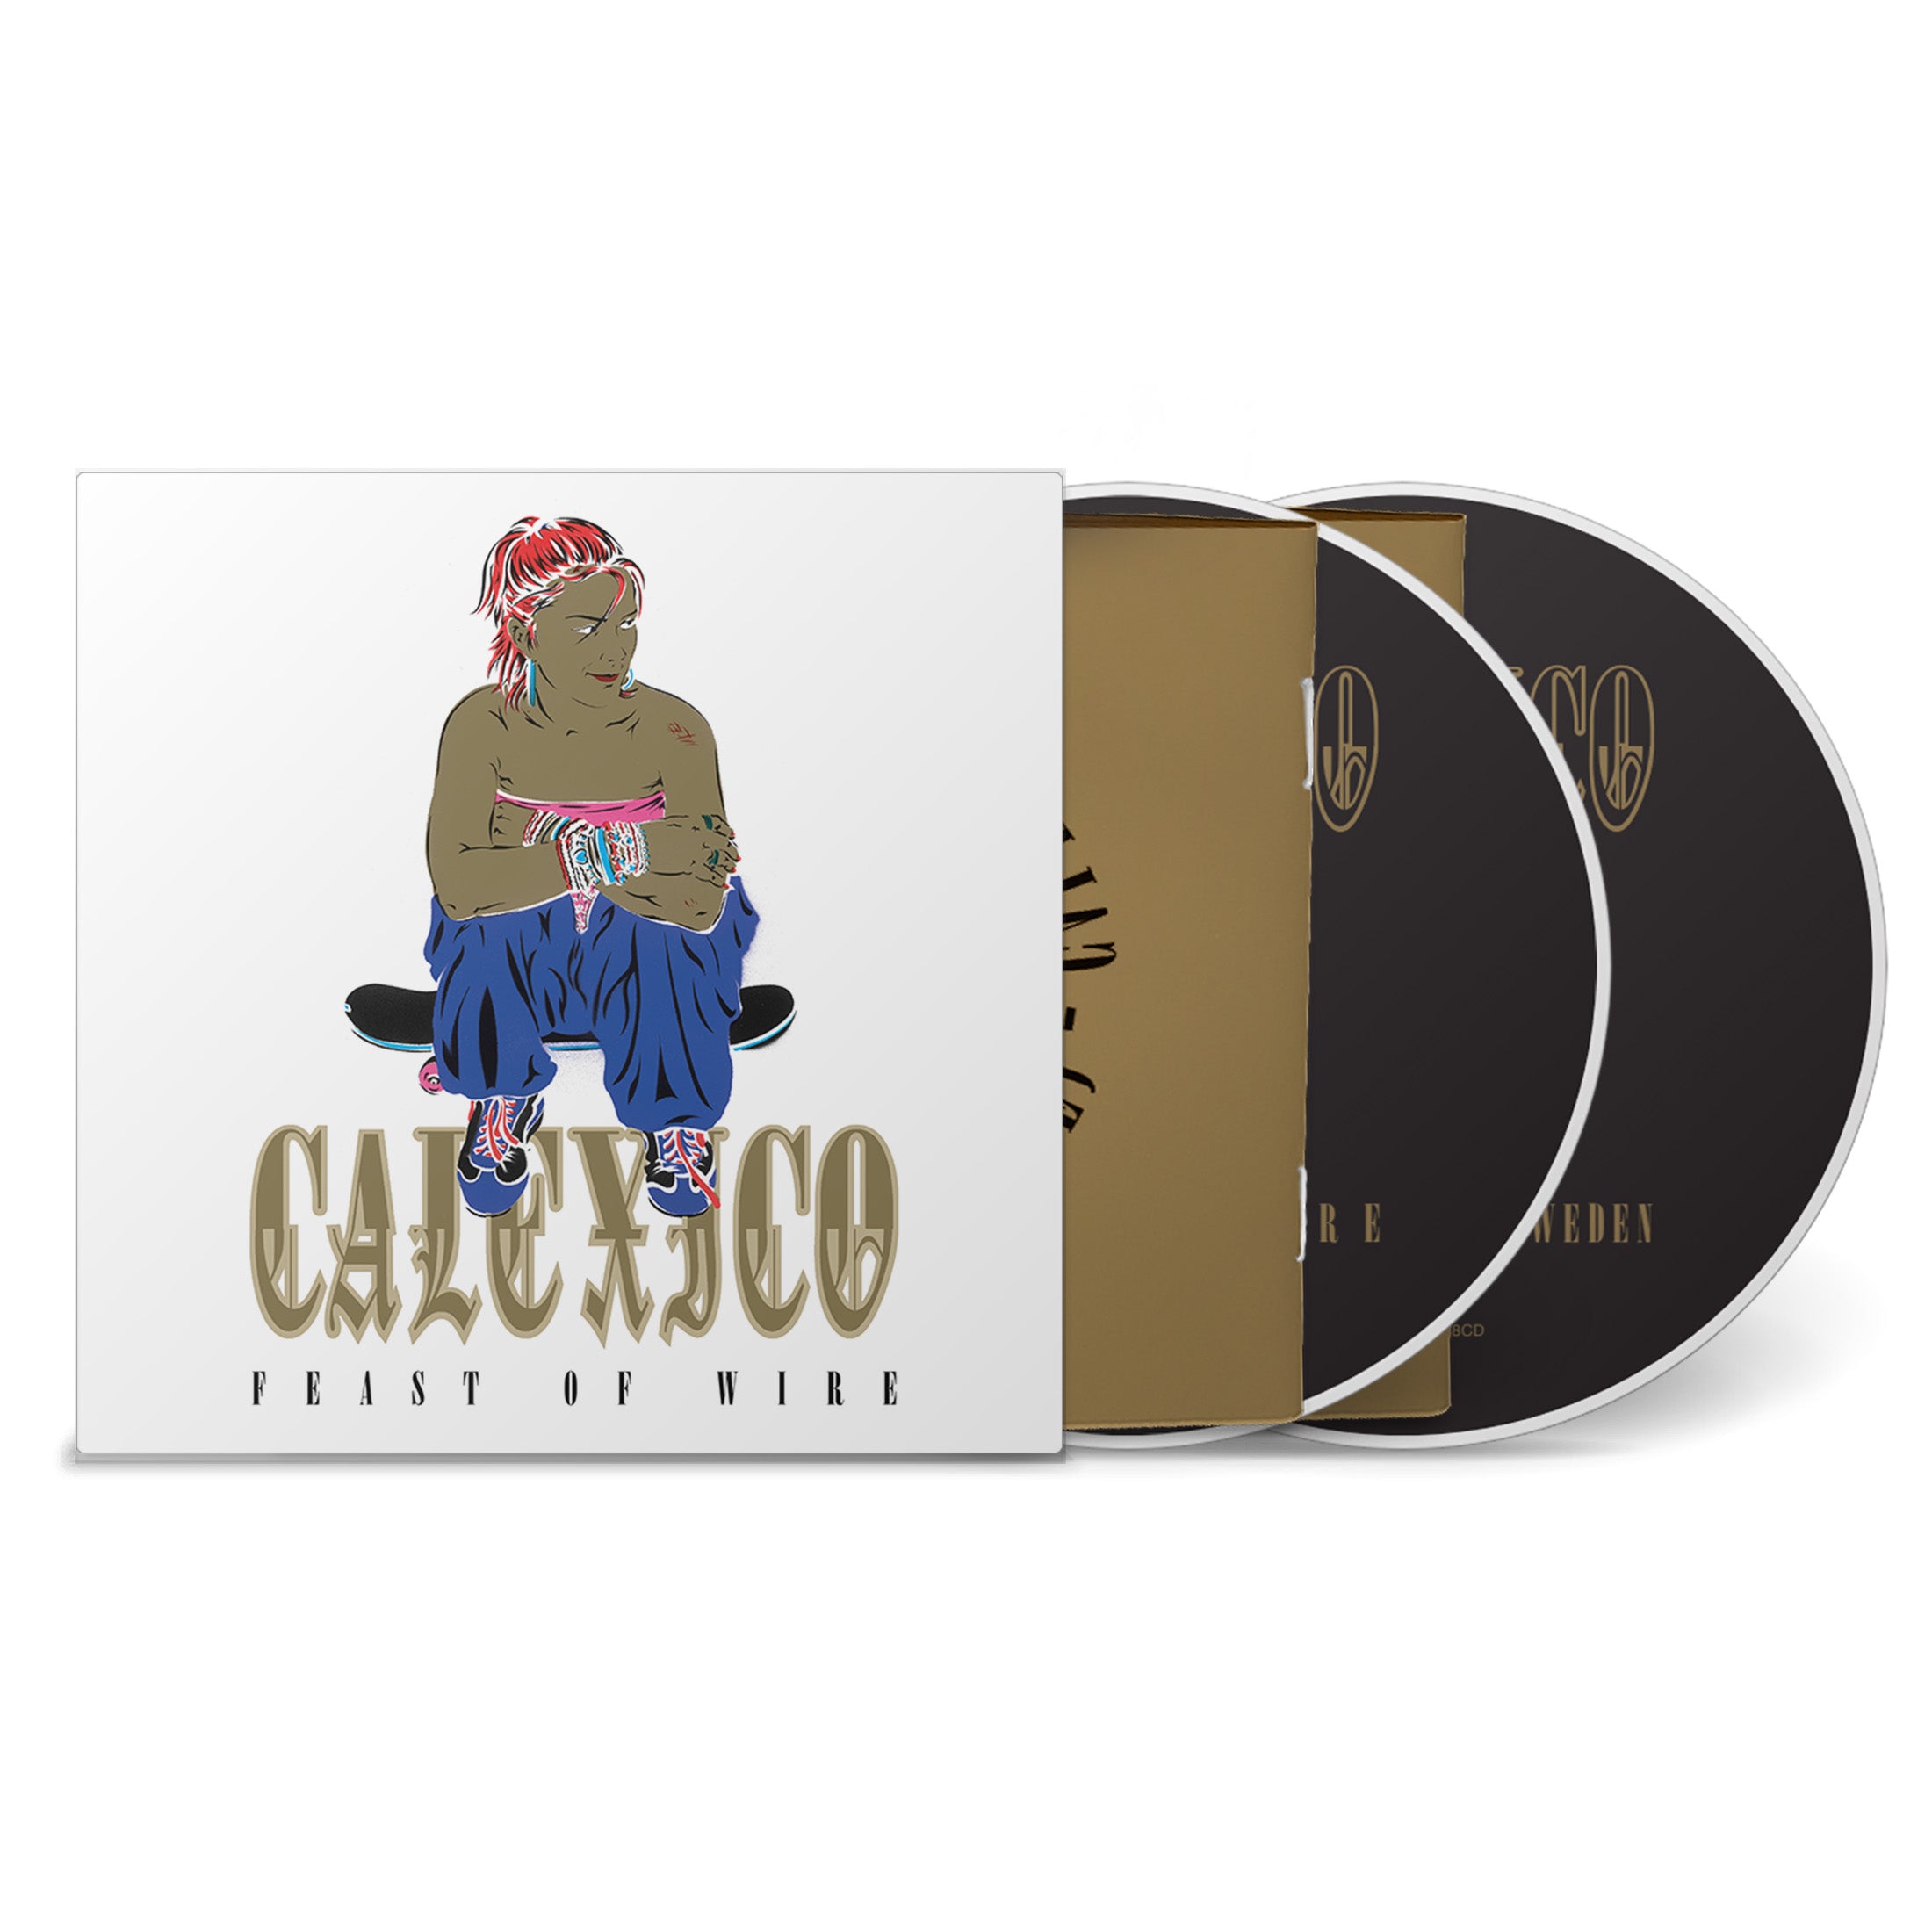 Calexico - Feast Of Wire (20th Anniversary Edition): 2CD